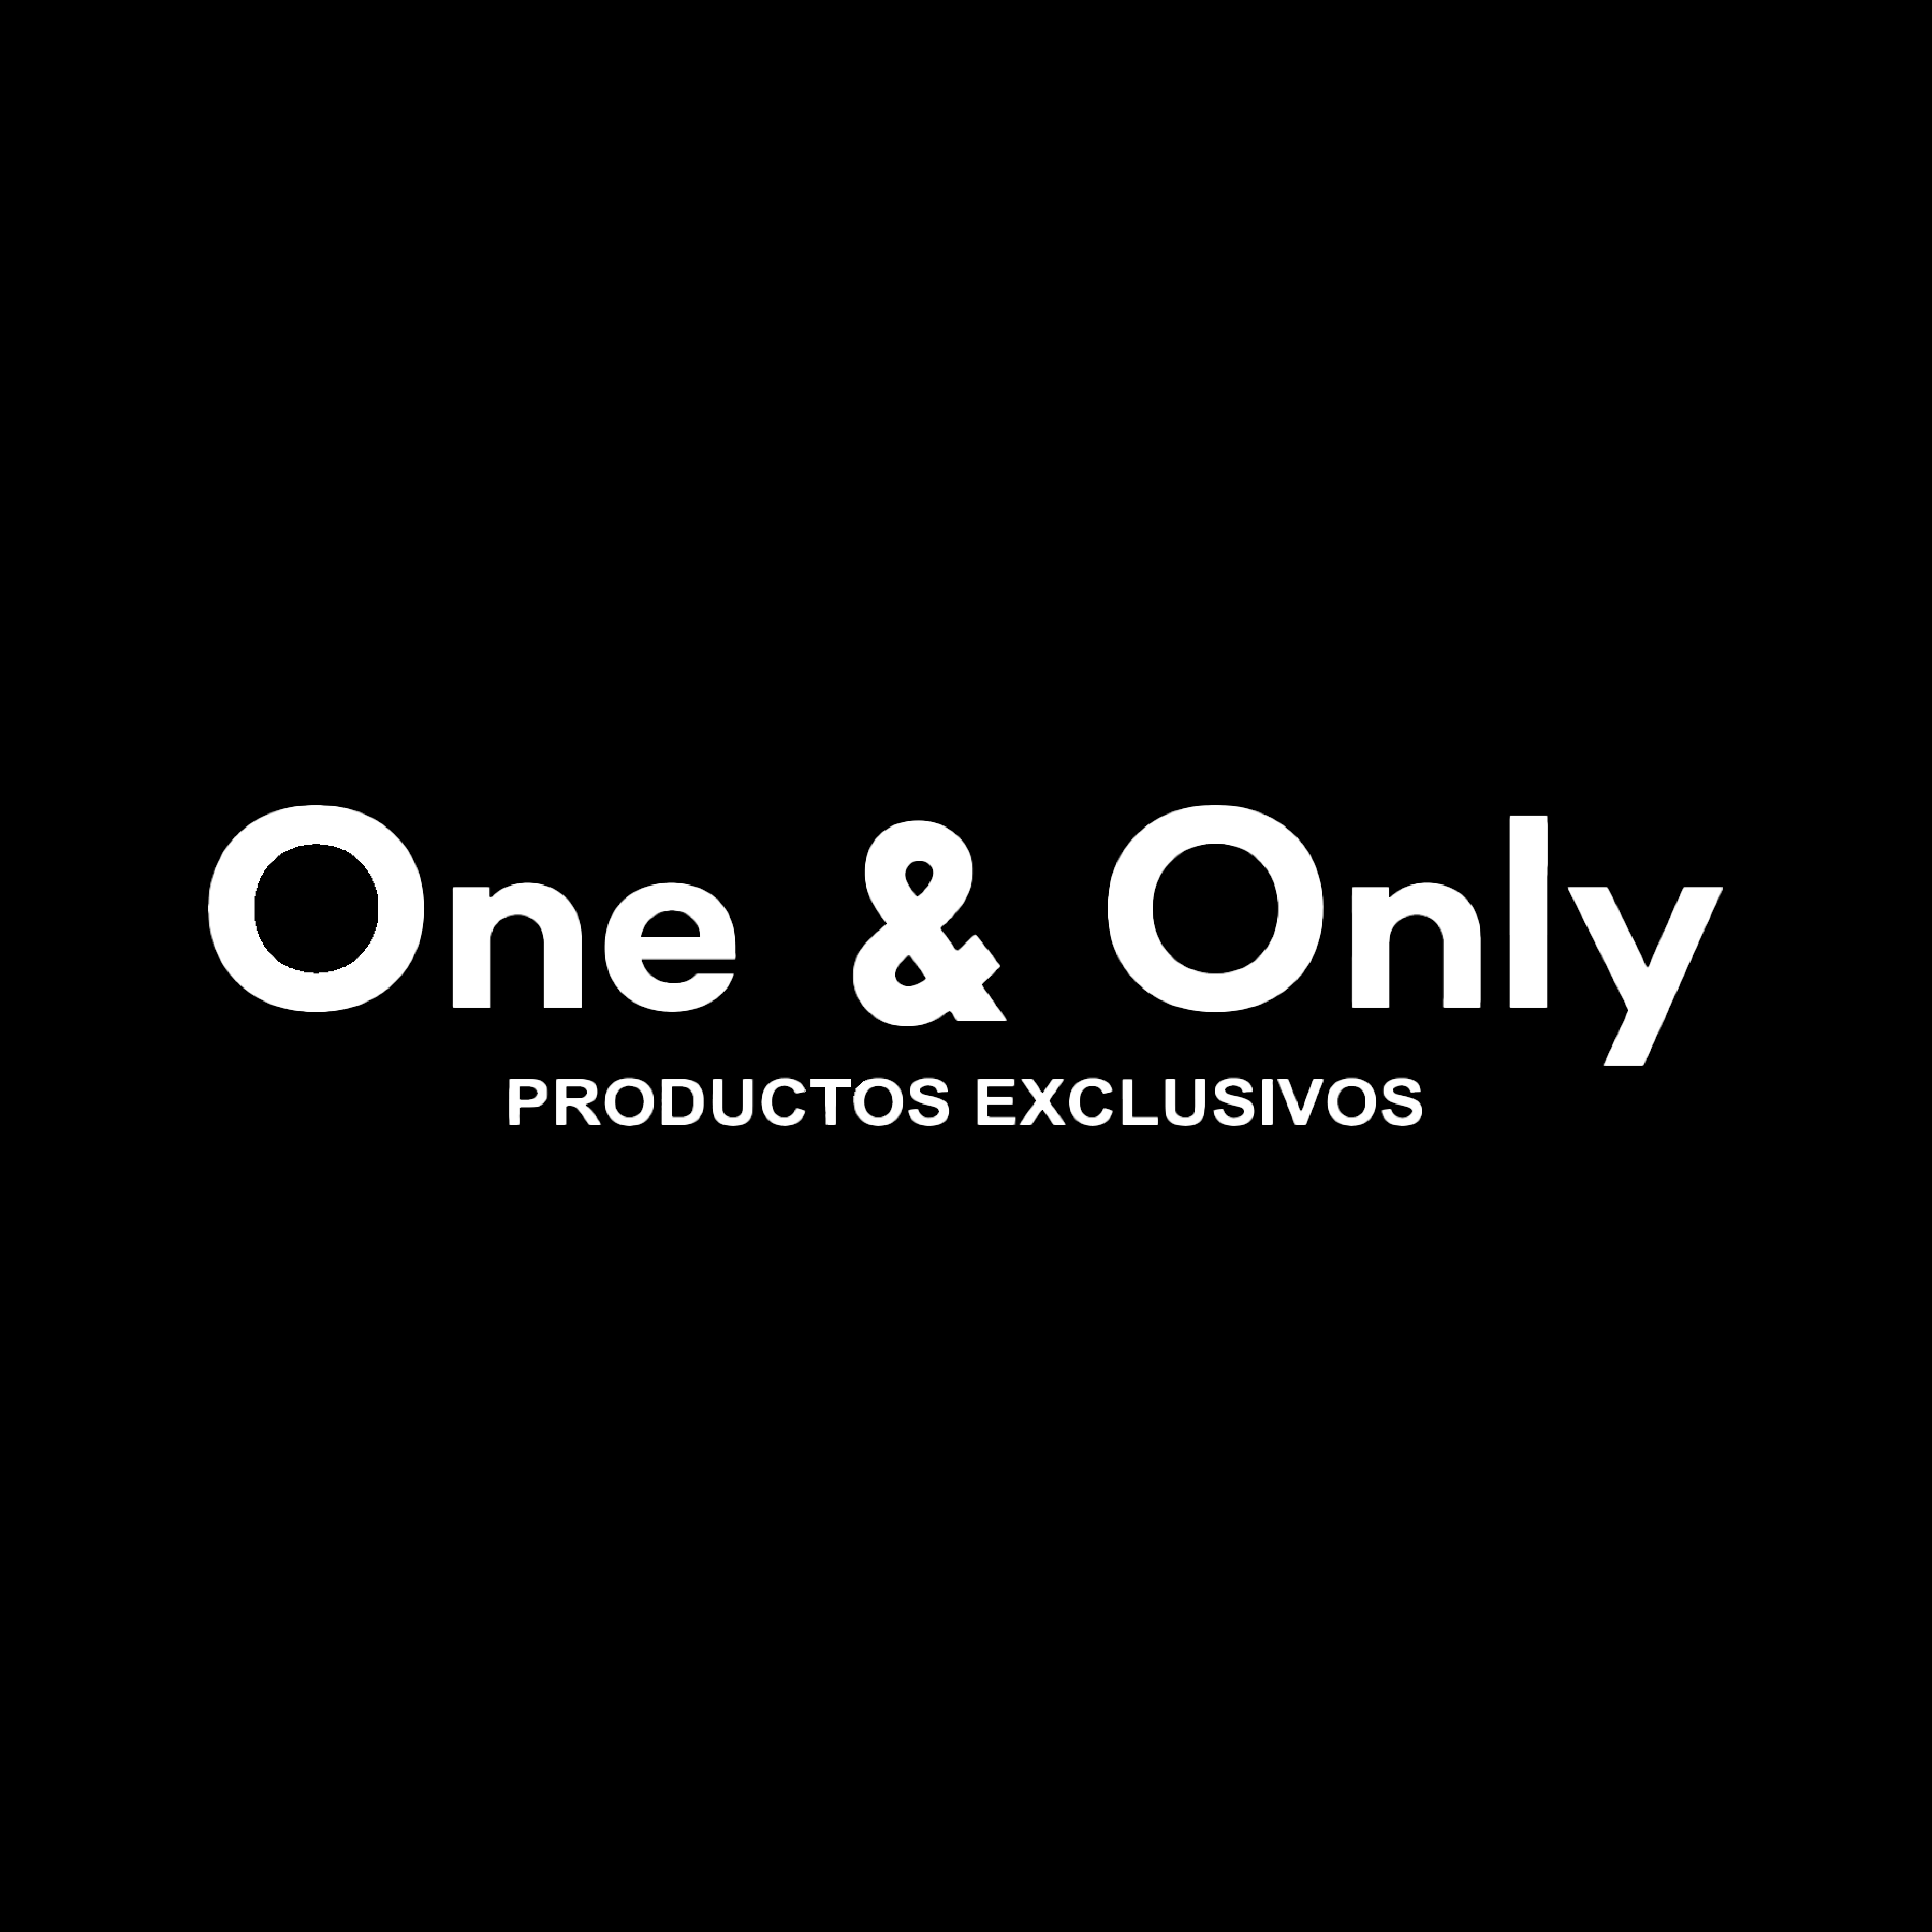 One & Only productos exclusivos